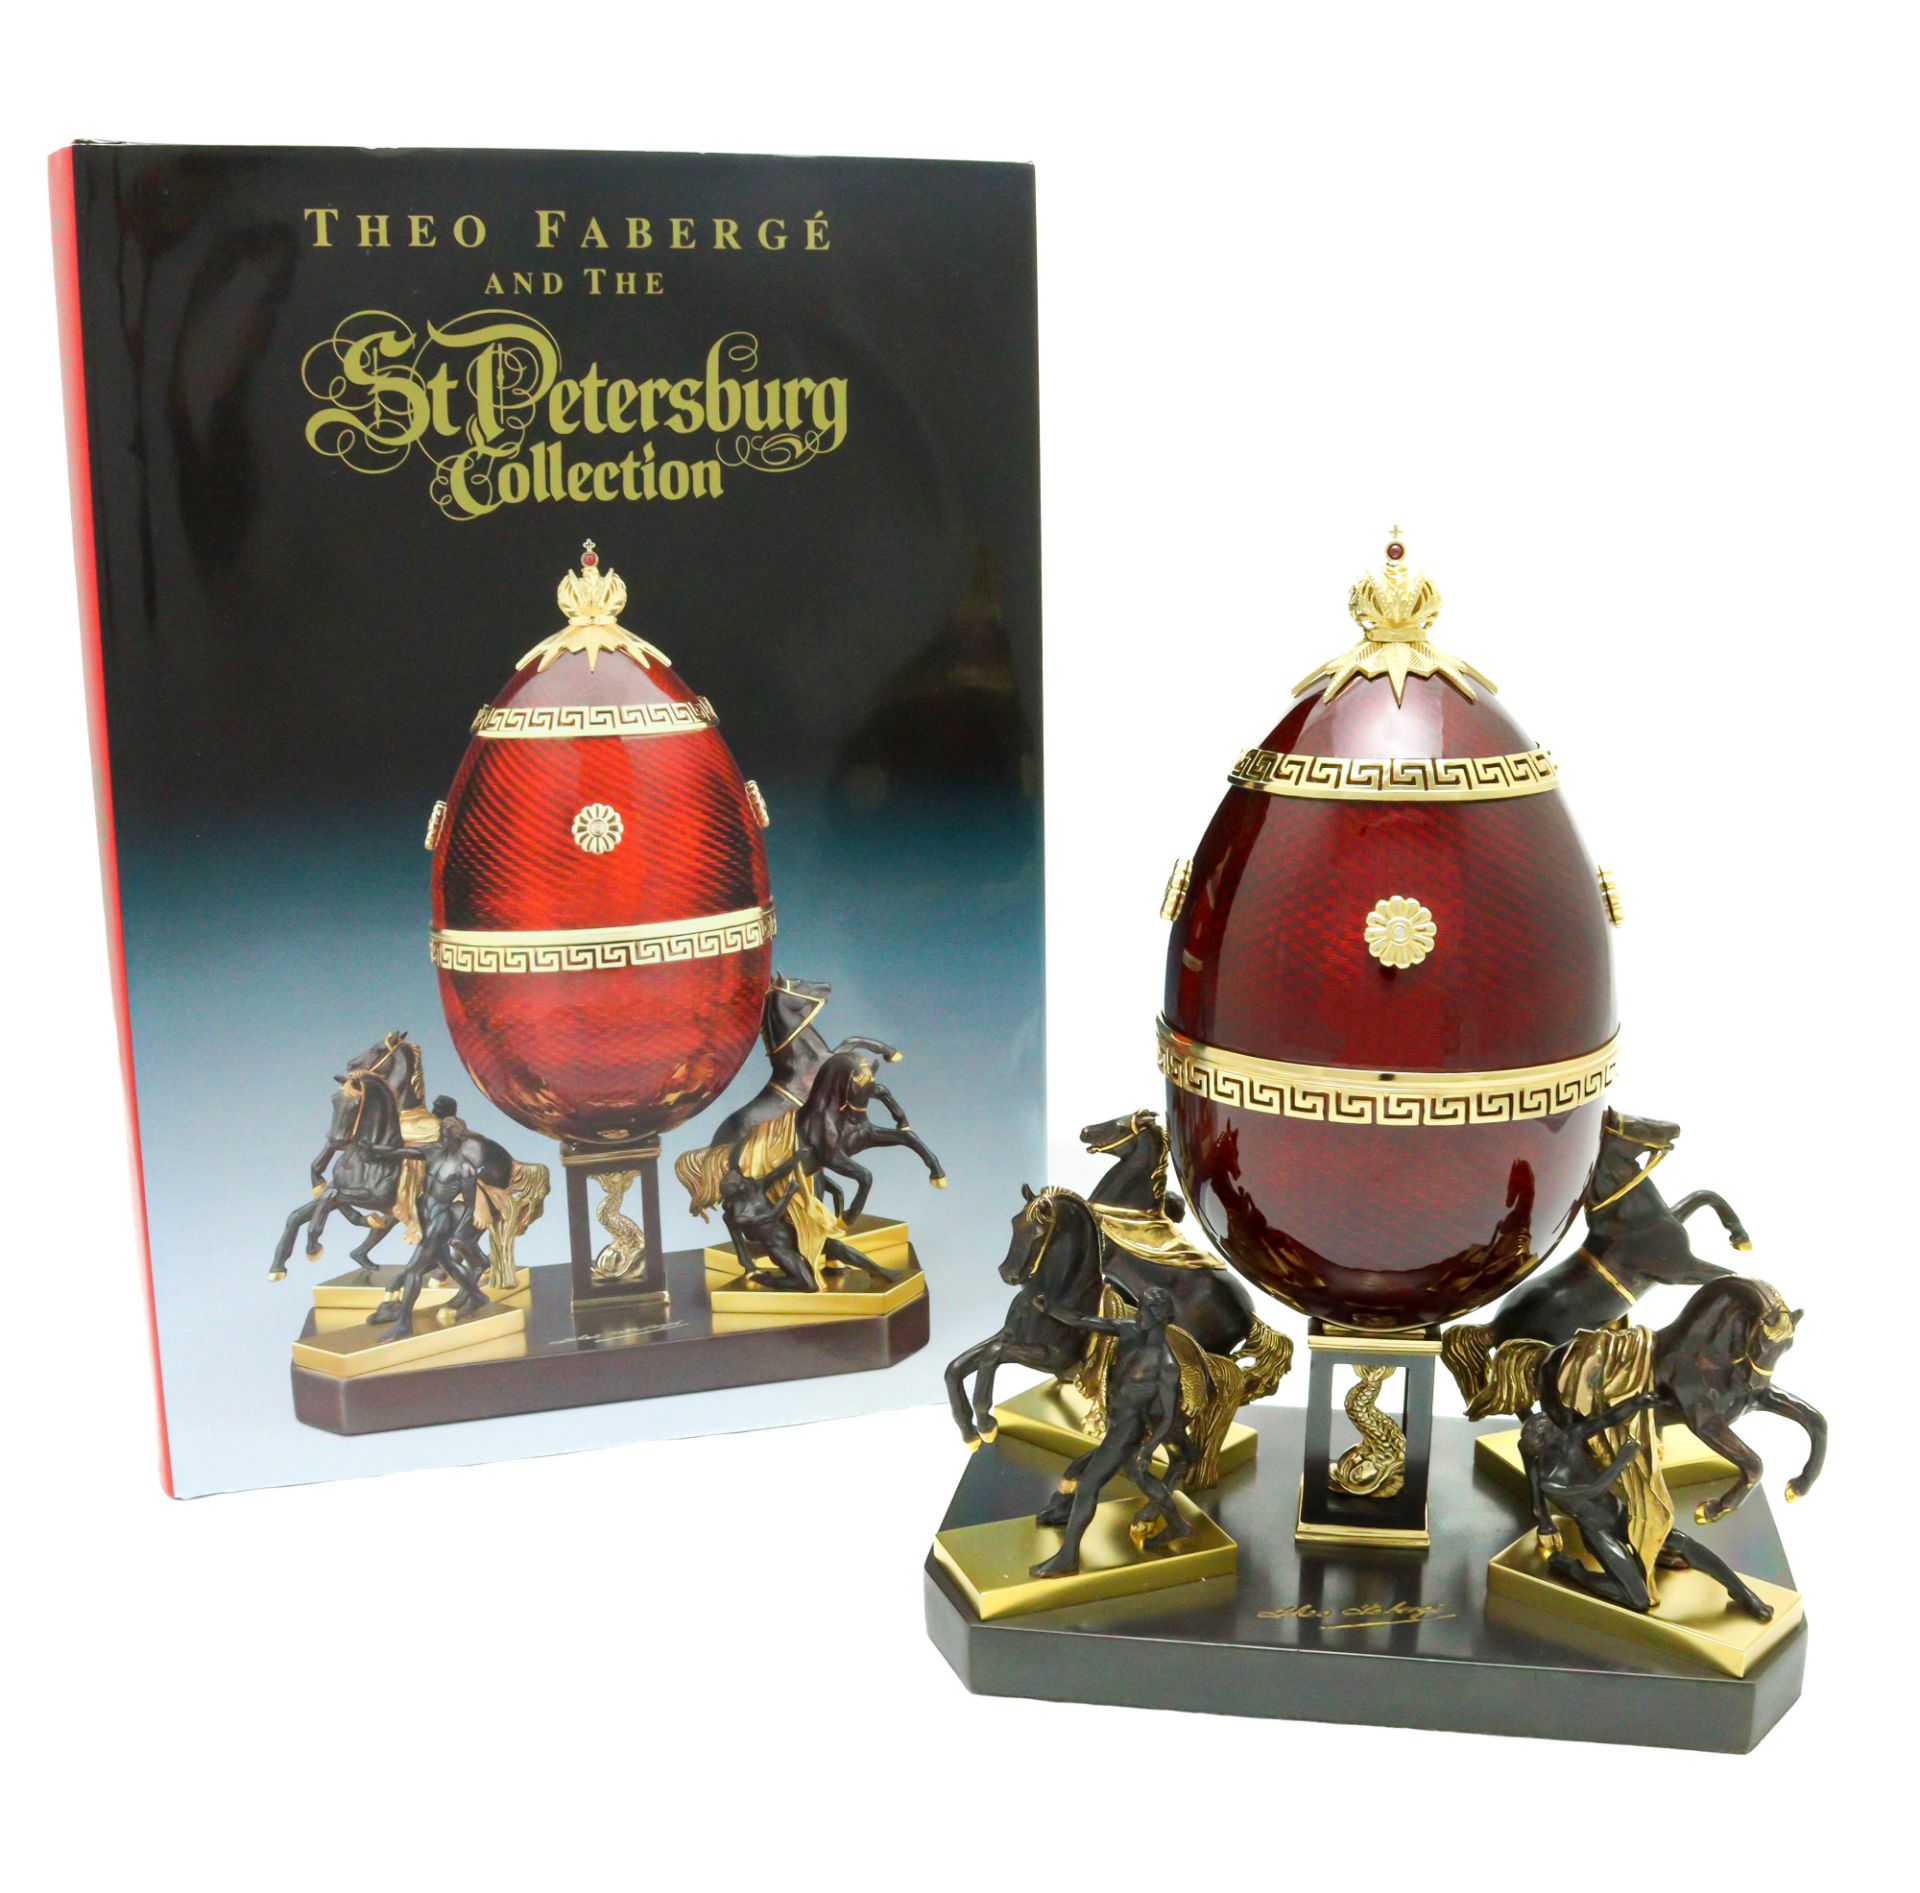 Theo Faberge Anichkov Egg - St Petersburg Collection - Image 37 of 37